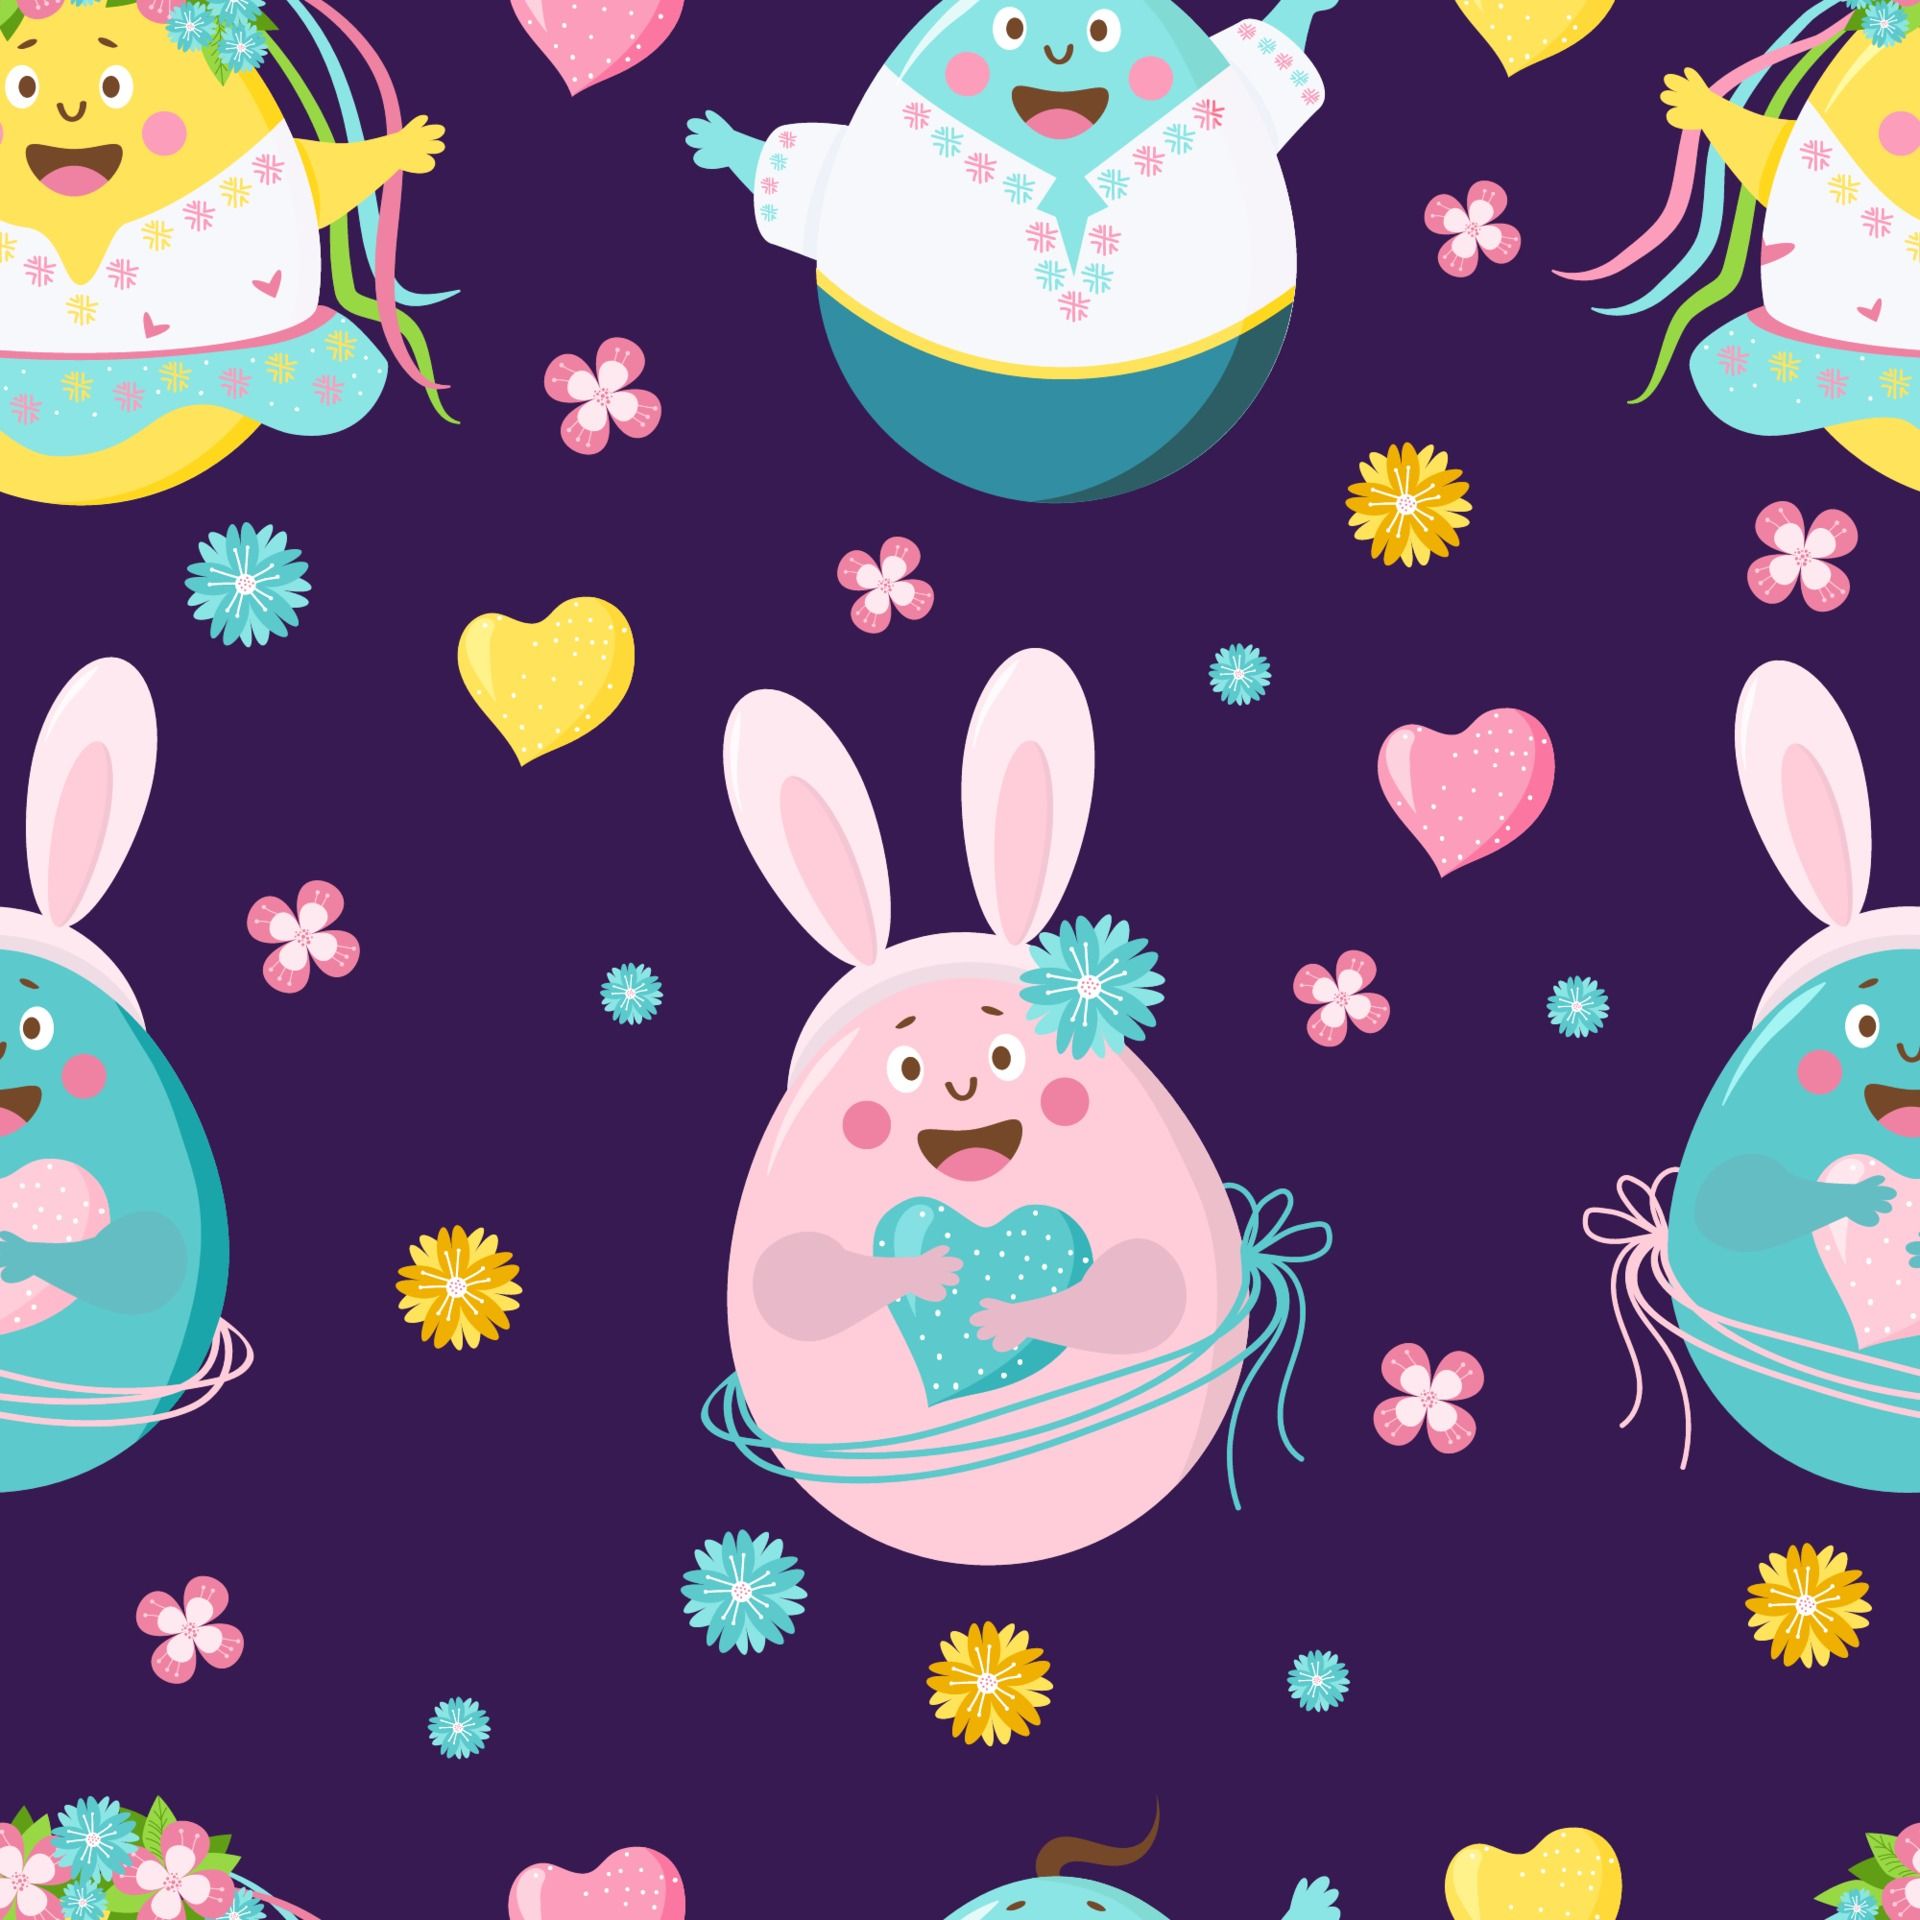 Happy Easter seamless pattern. Funny Easter eggs and boys with faces, emotions and hands, with bunny ears on a purple background with flowers. Vector. For design, decoration, print, wallpaper